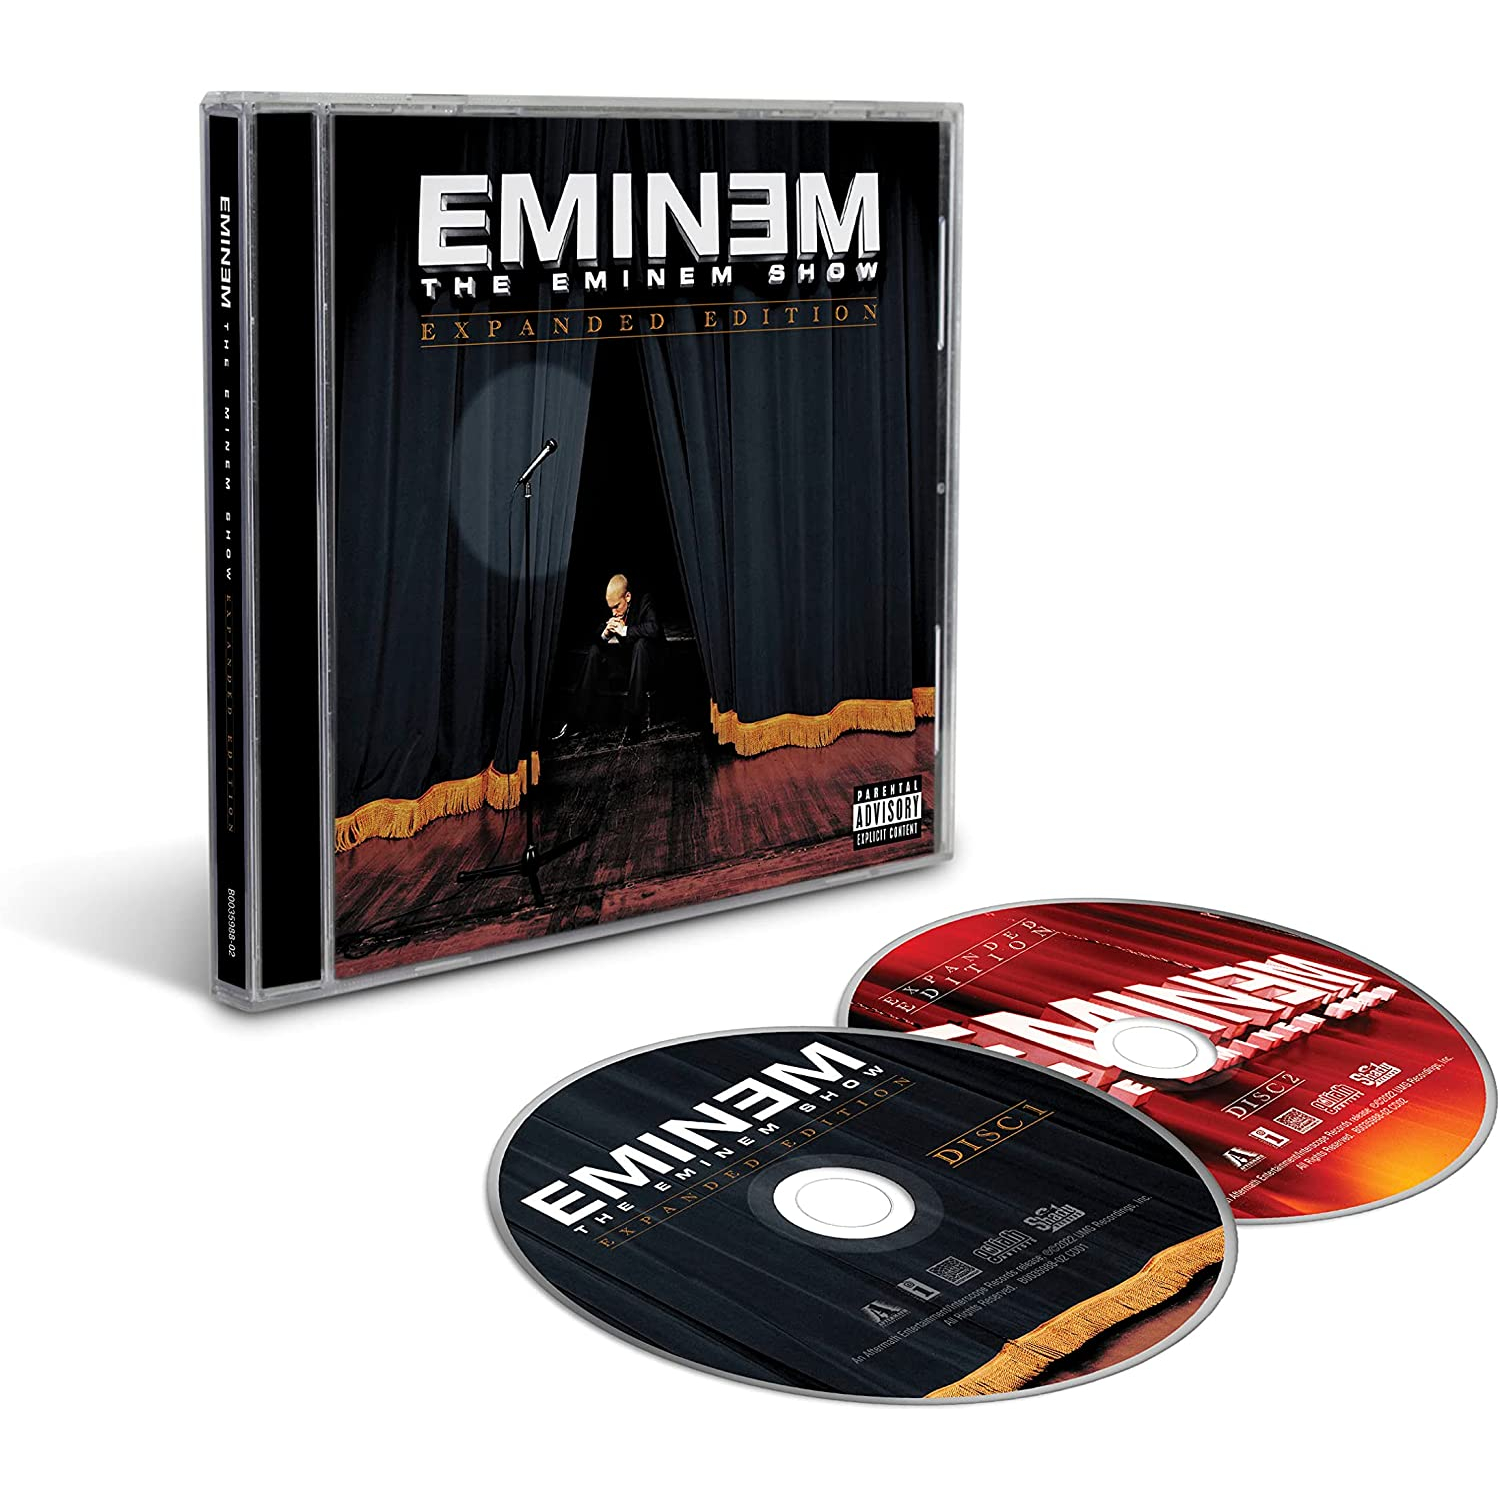 THE EMINEM SHOW DELUXE